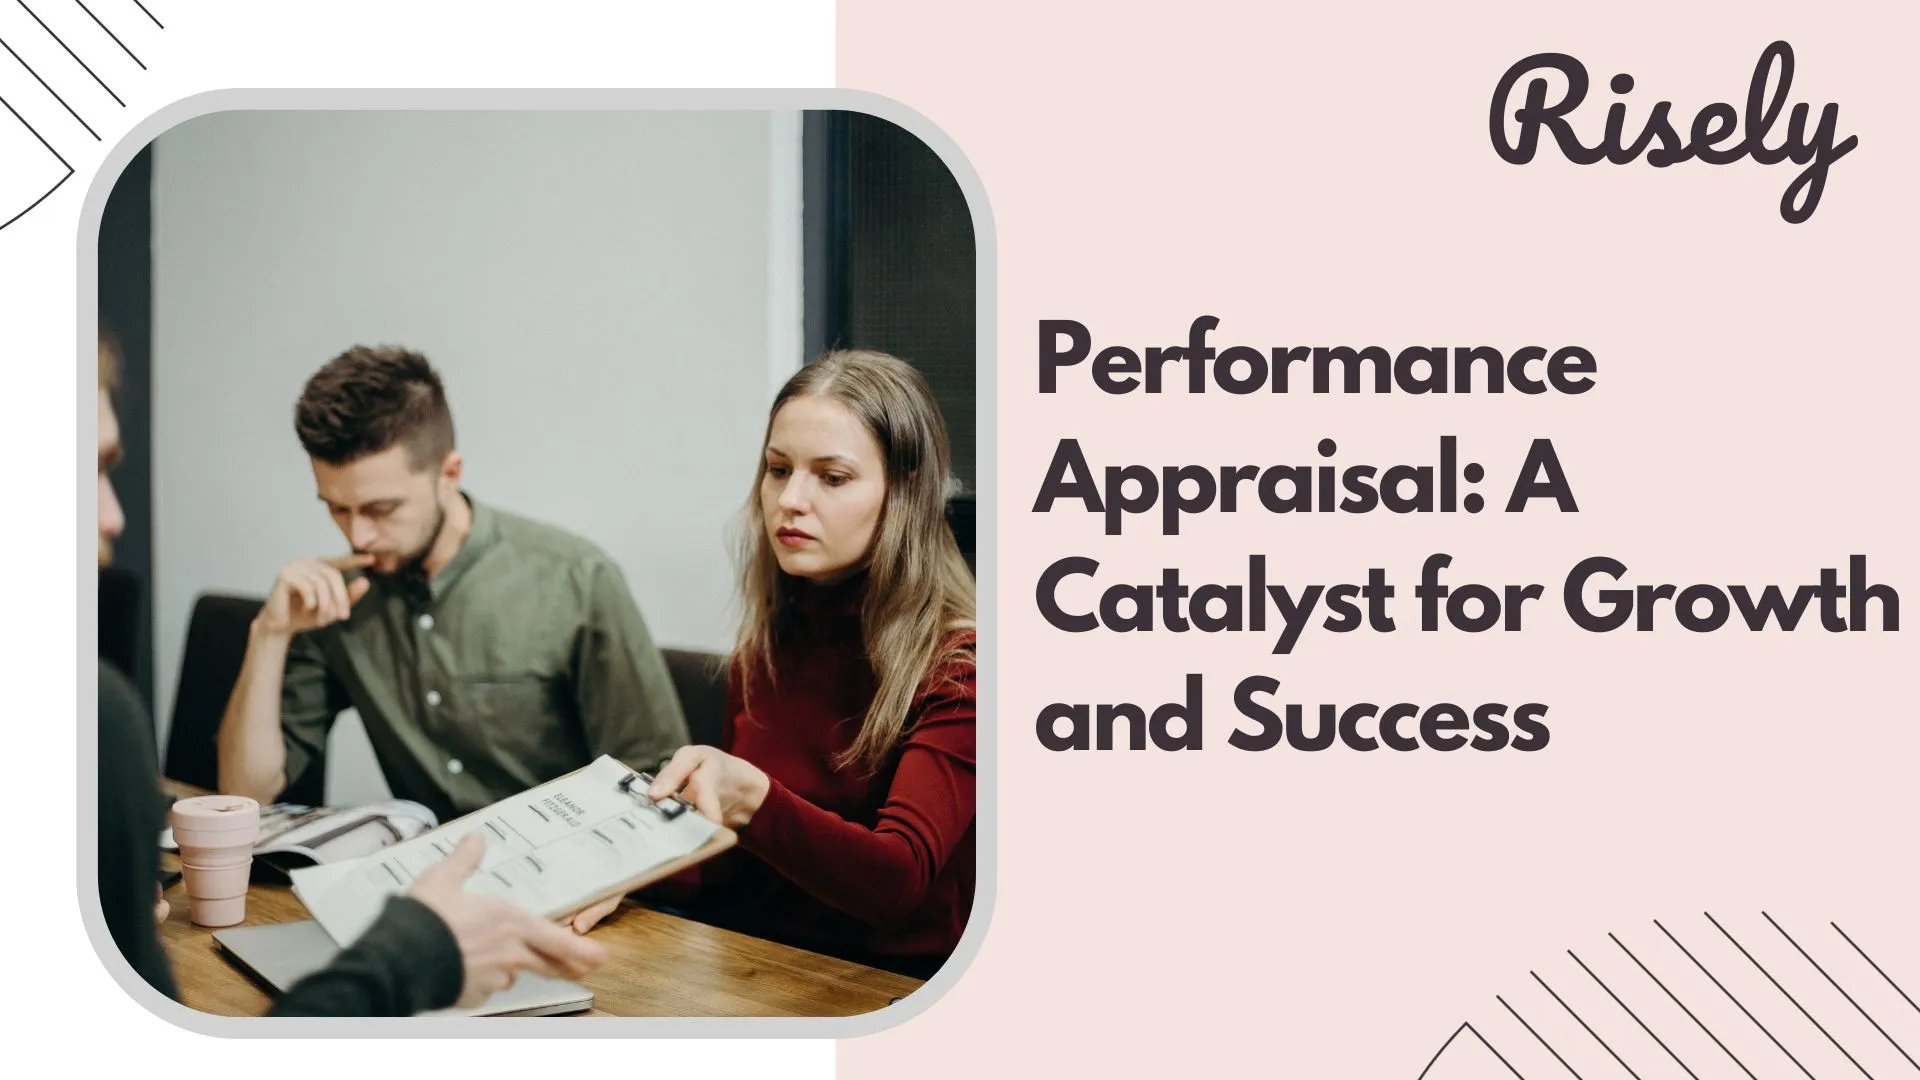 Performance Appraisal: A Catalyst for Growth and Success